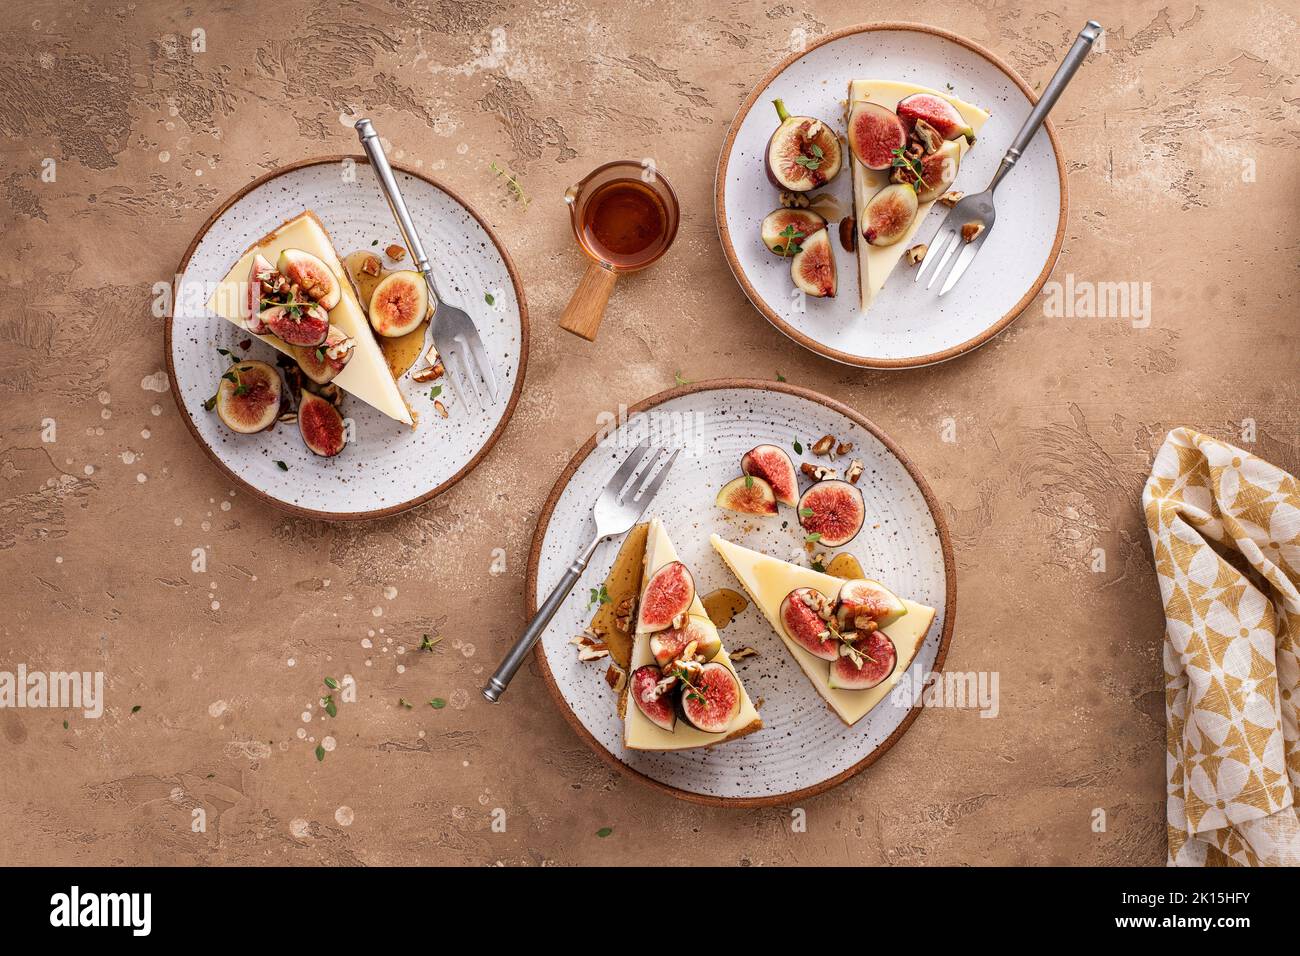 Fall cheesecake with figs and maple syrup Stock Photo